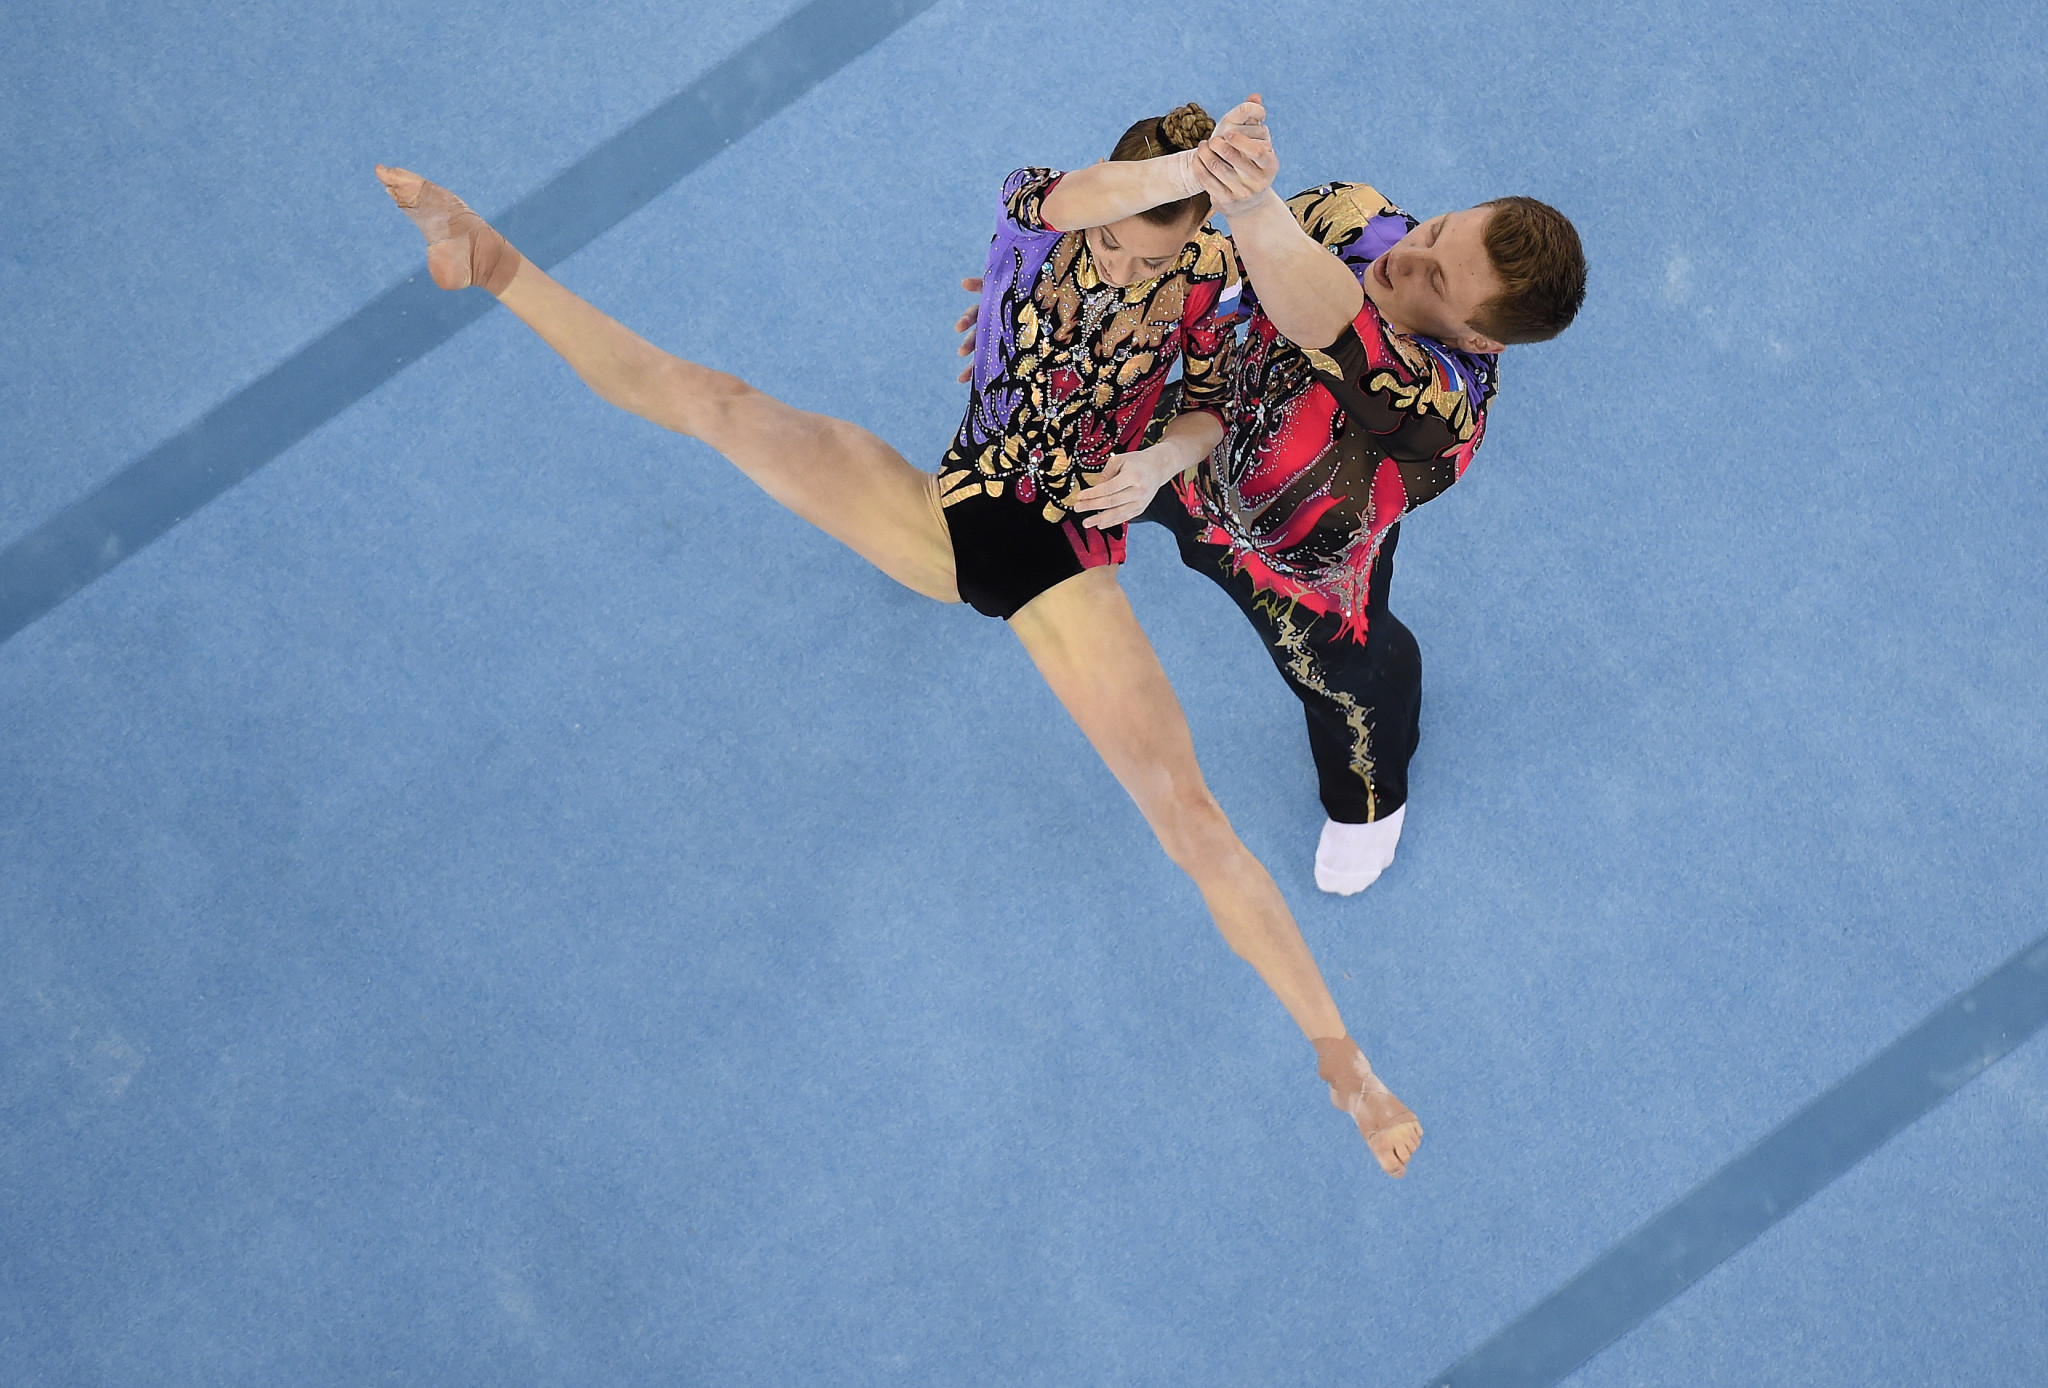 Russian acrobatic gymnastics duo named World Games Athlete of the Year 2018